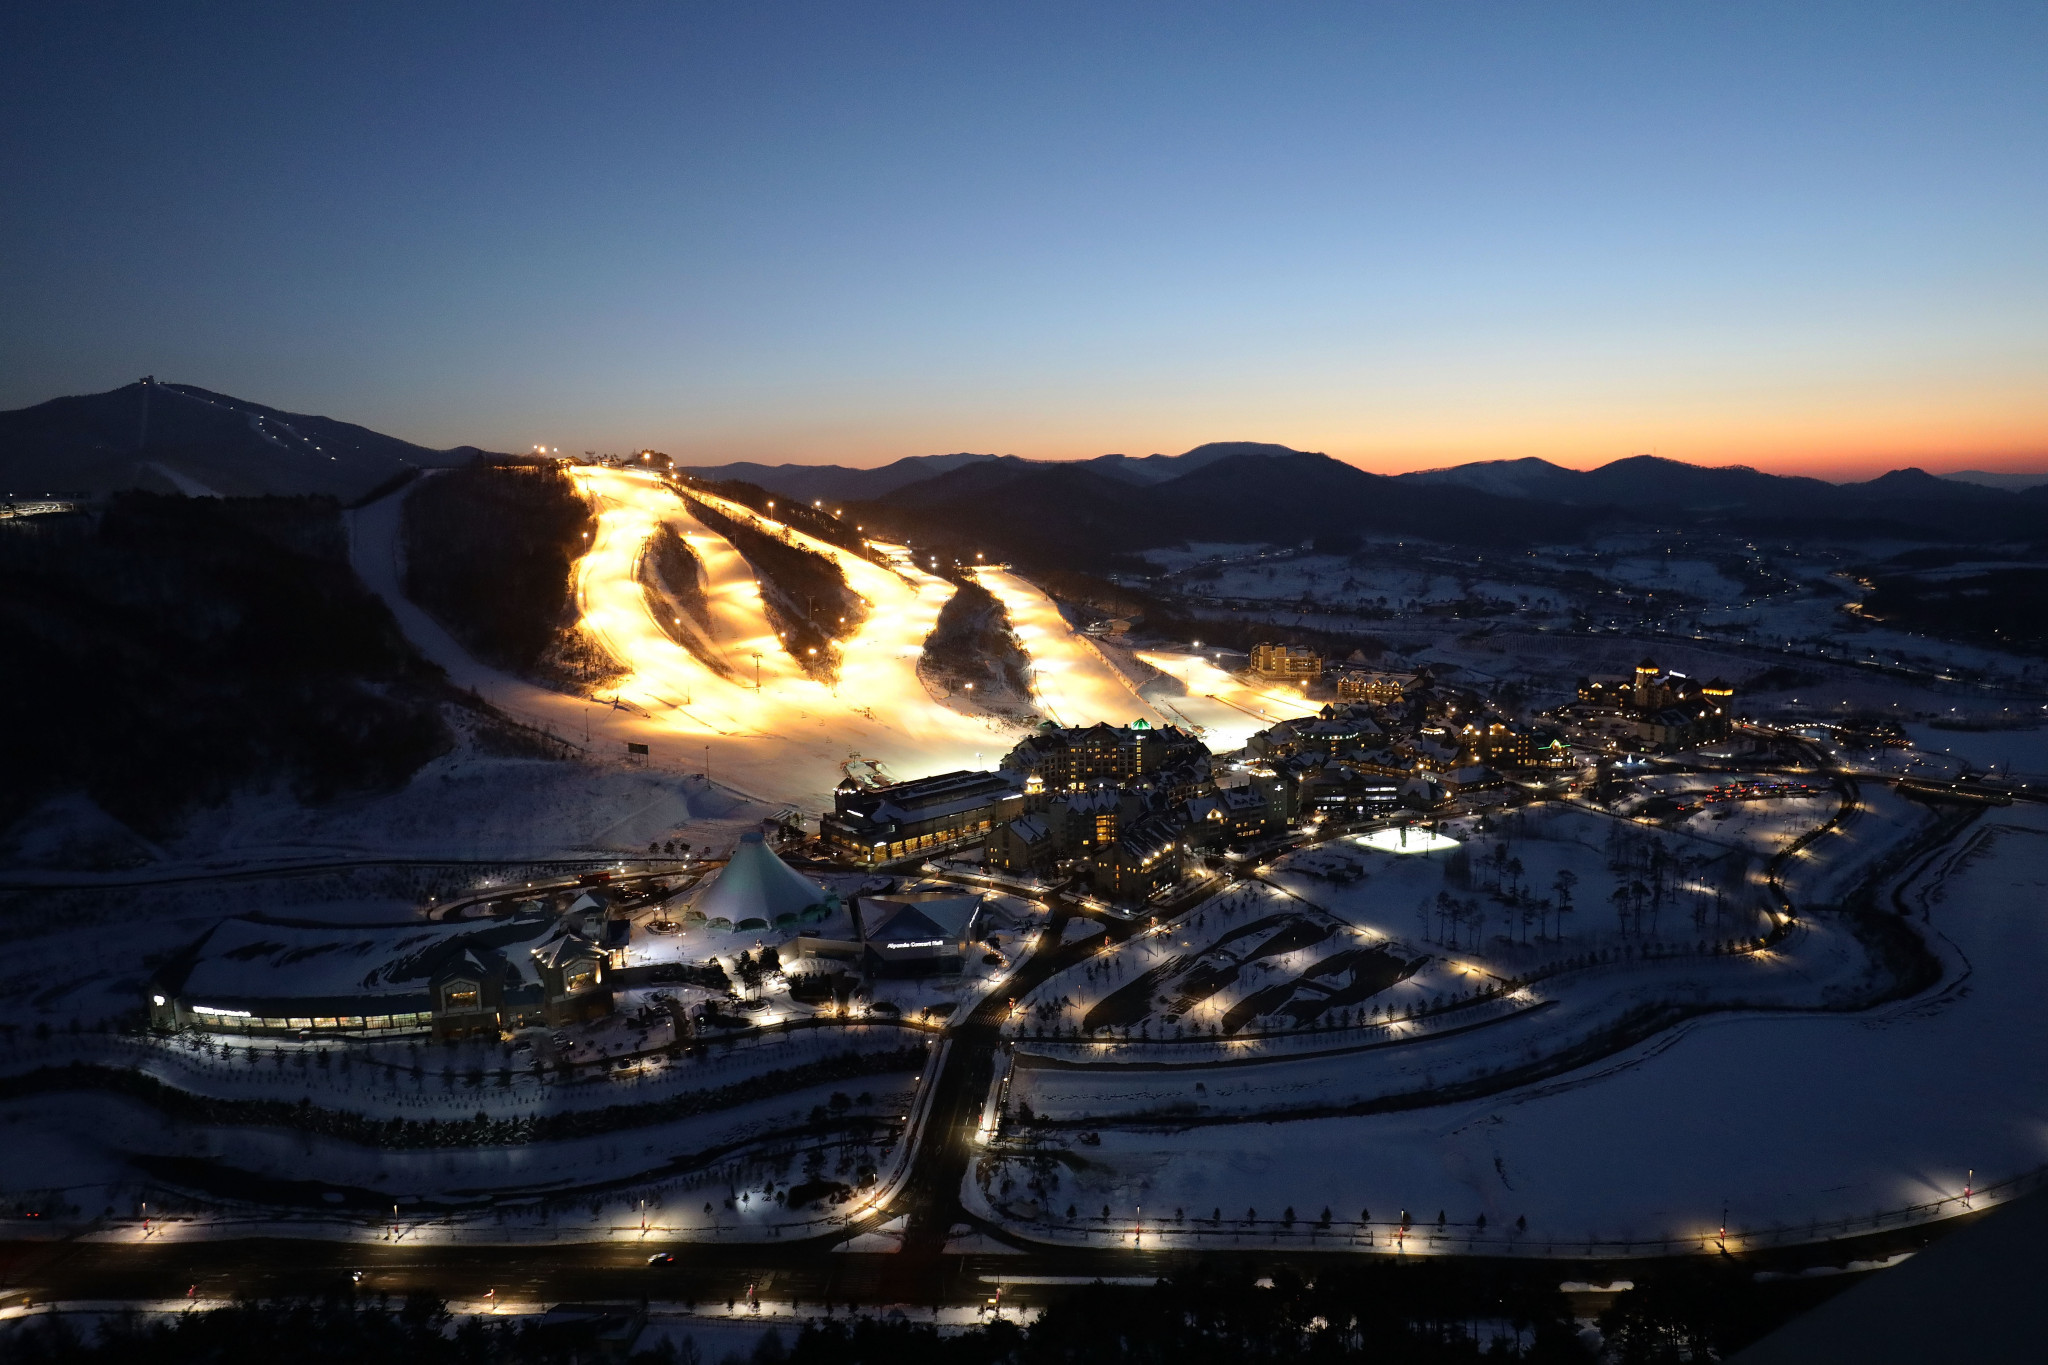 Similarly to Pyeongchang 2018, the Alpensia Sports Park is due to host the majority of events at Gangwon 2024 ©Getty Images